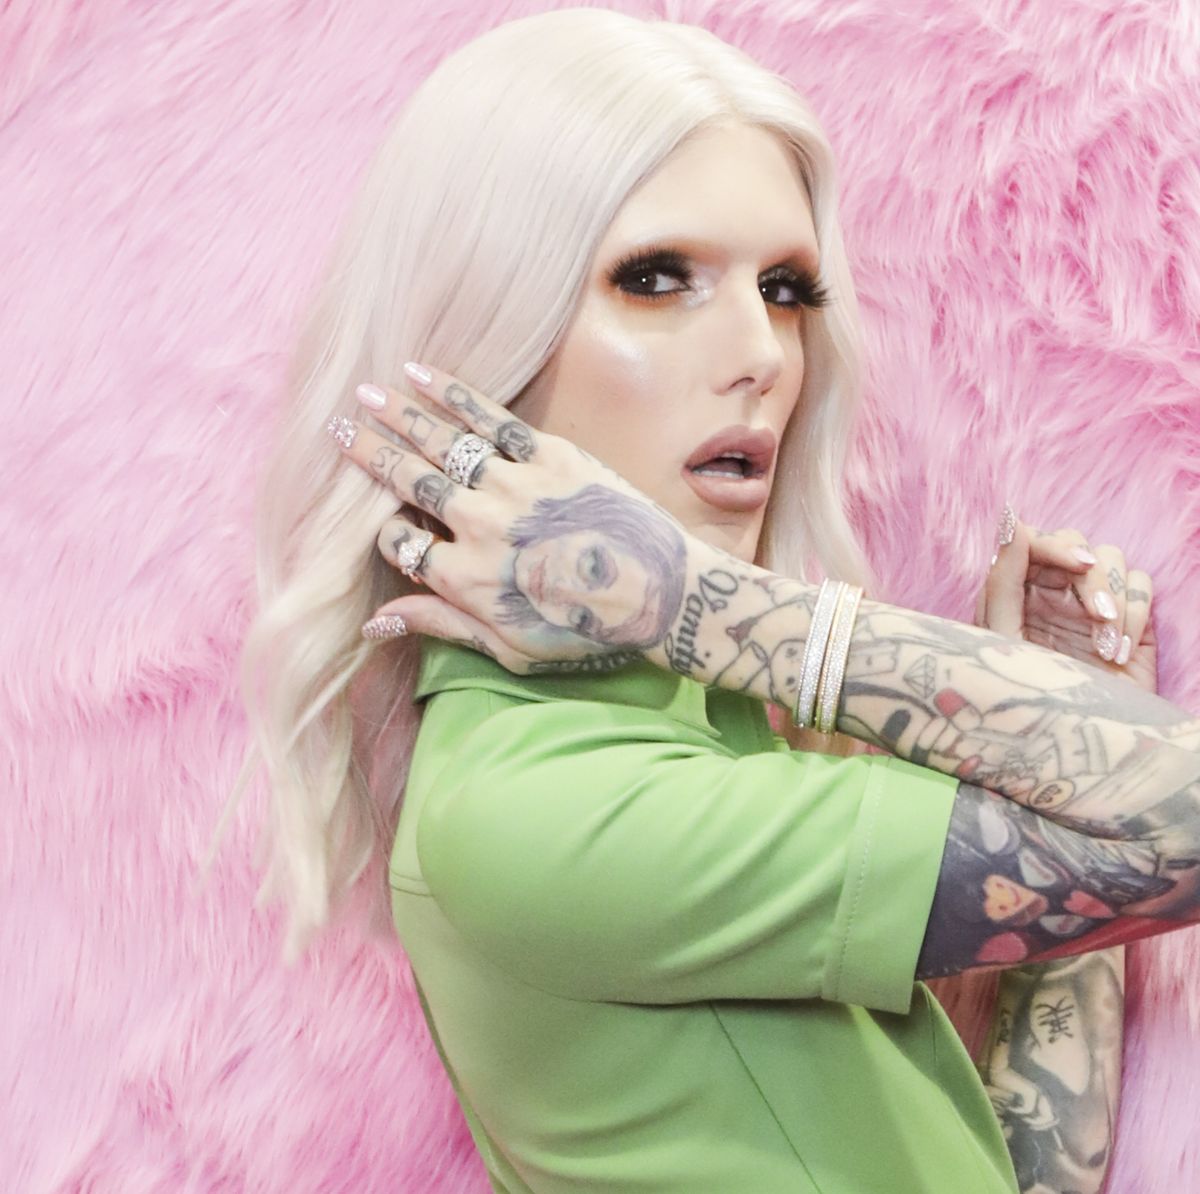 Who Is Jeffree Star? - Everything to Know About Jeffree Star